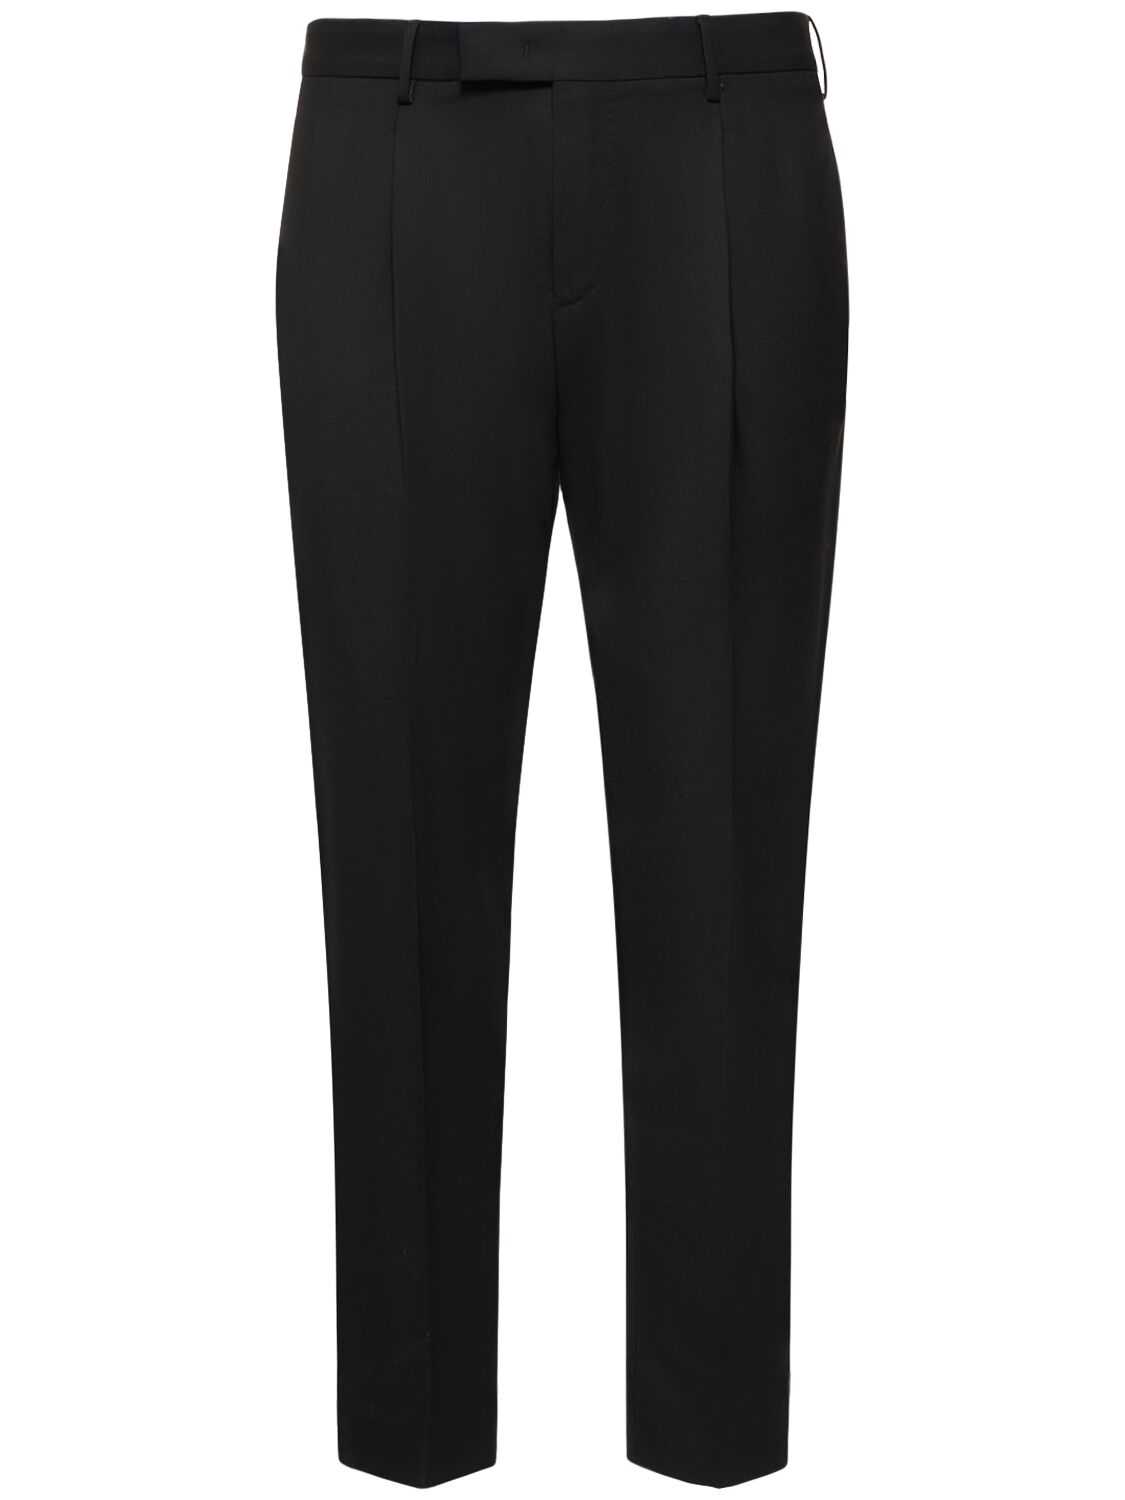 Pt Torino Pleated Stretch Wool Pants In Black